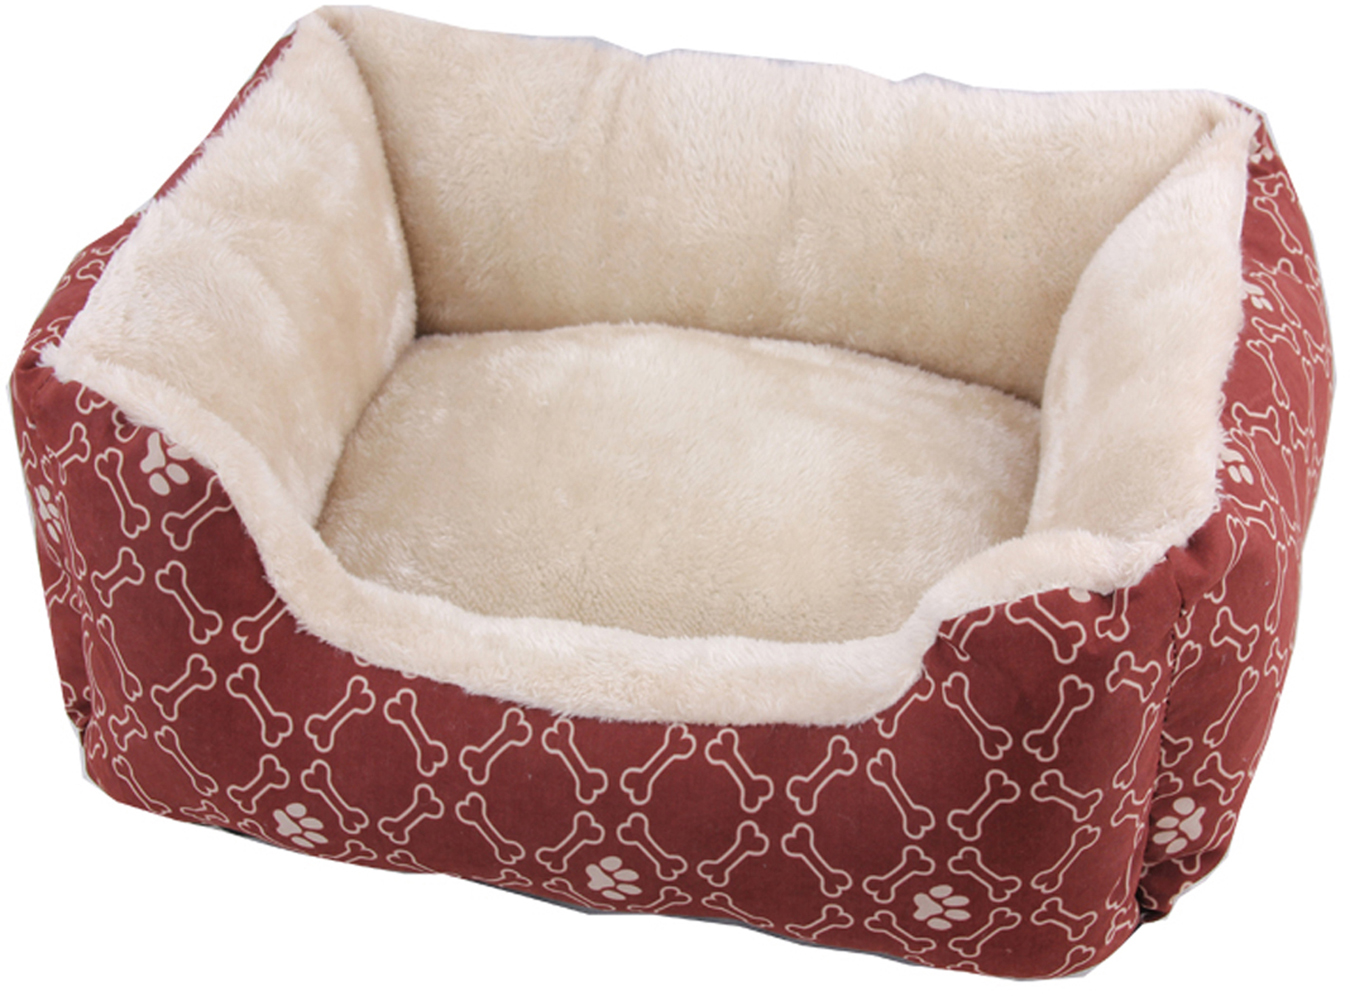 Pawise Square Dog Bed-wine red 19"